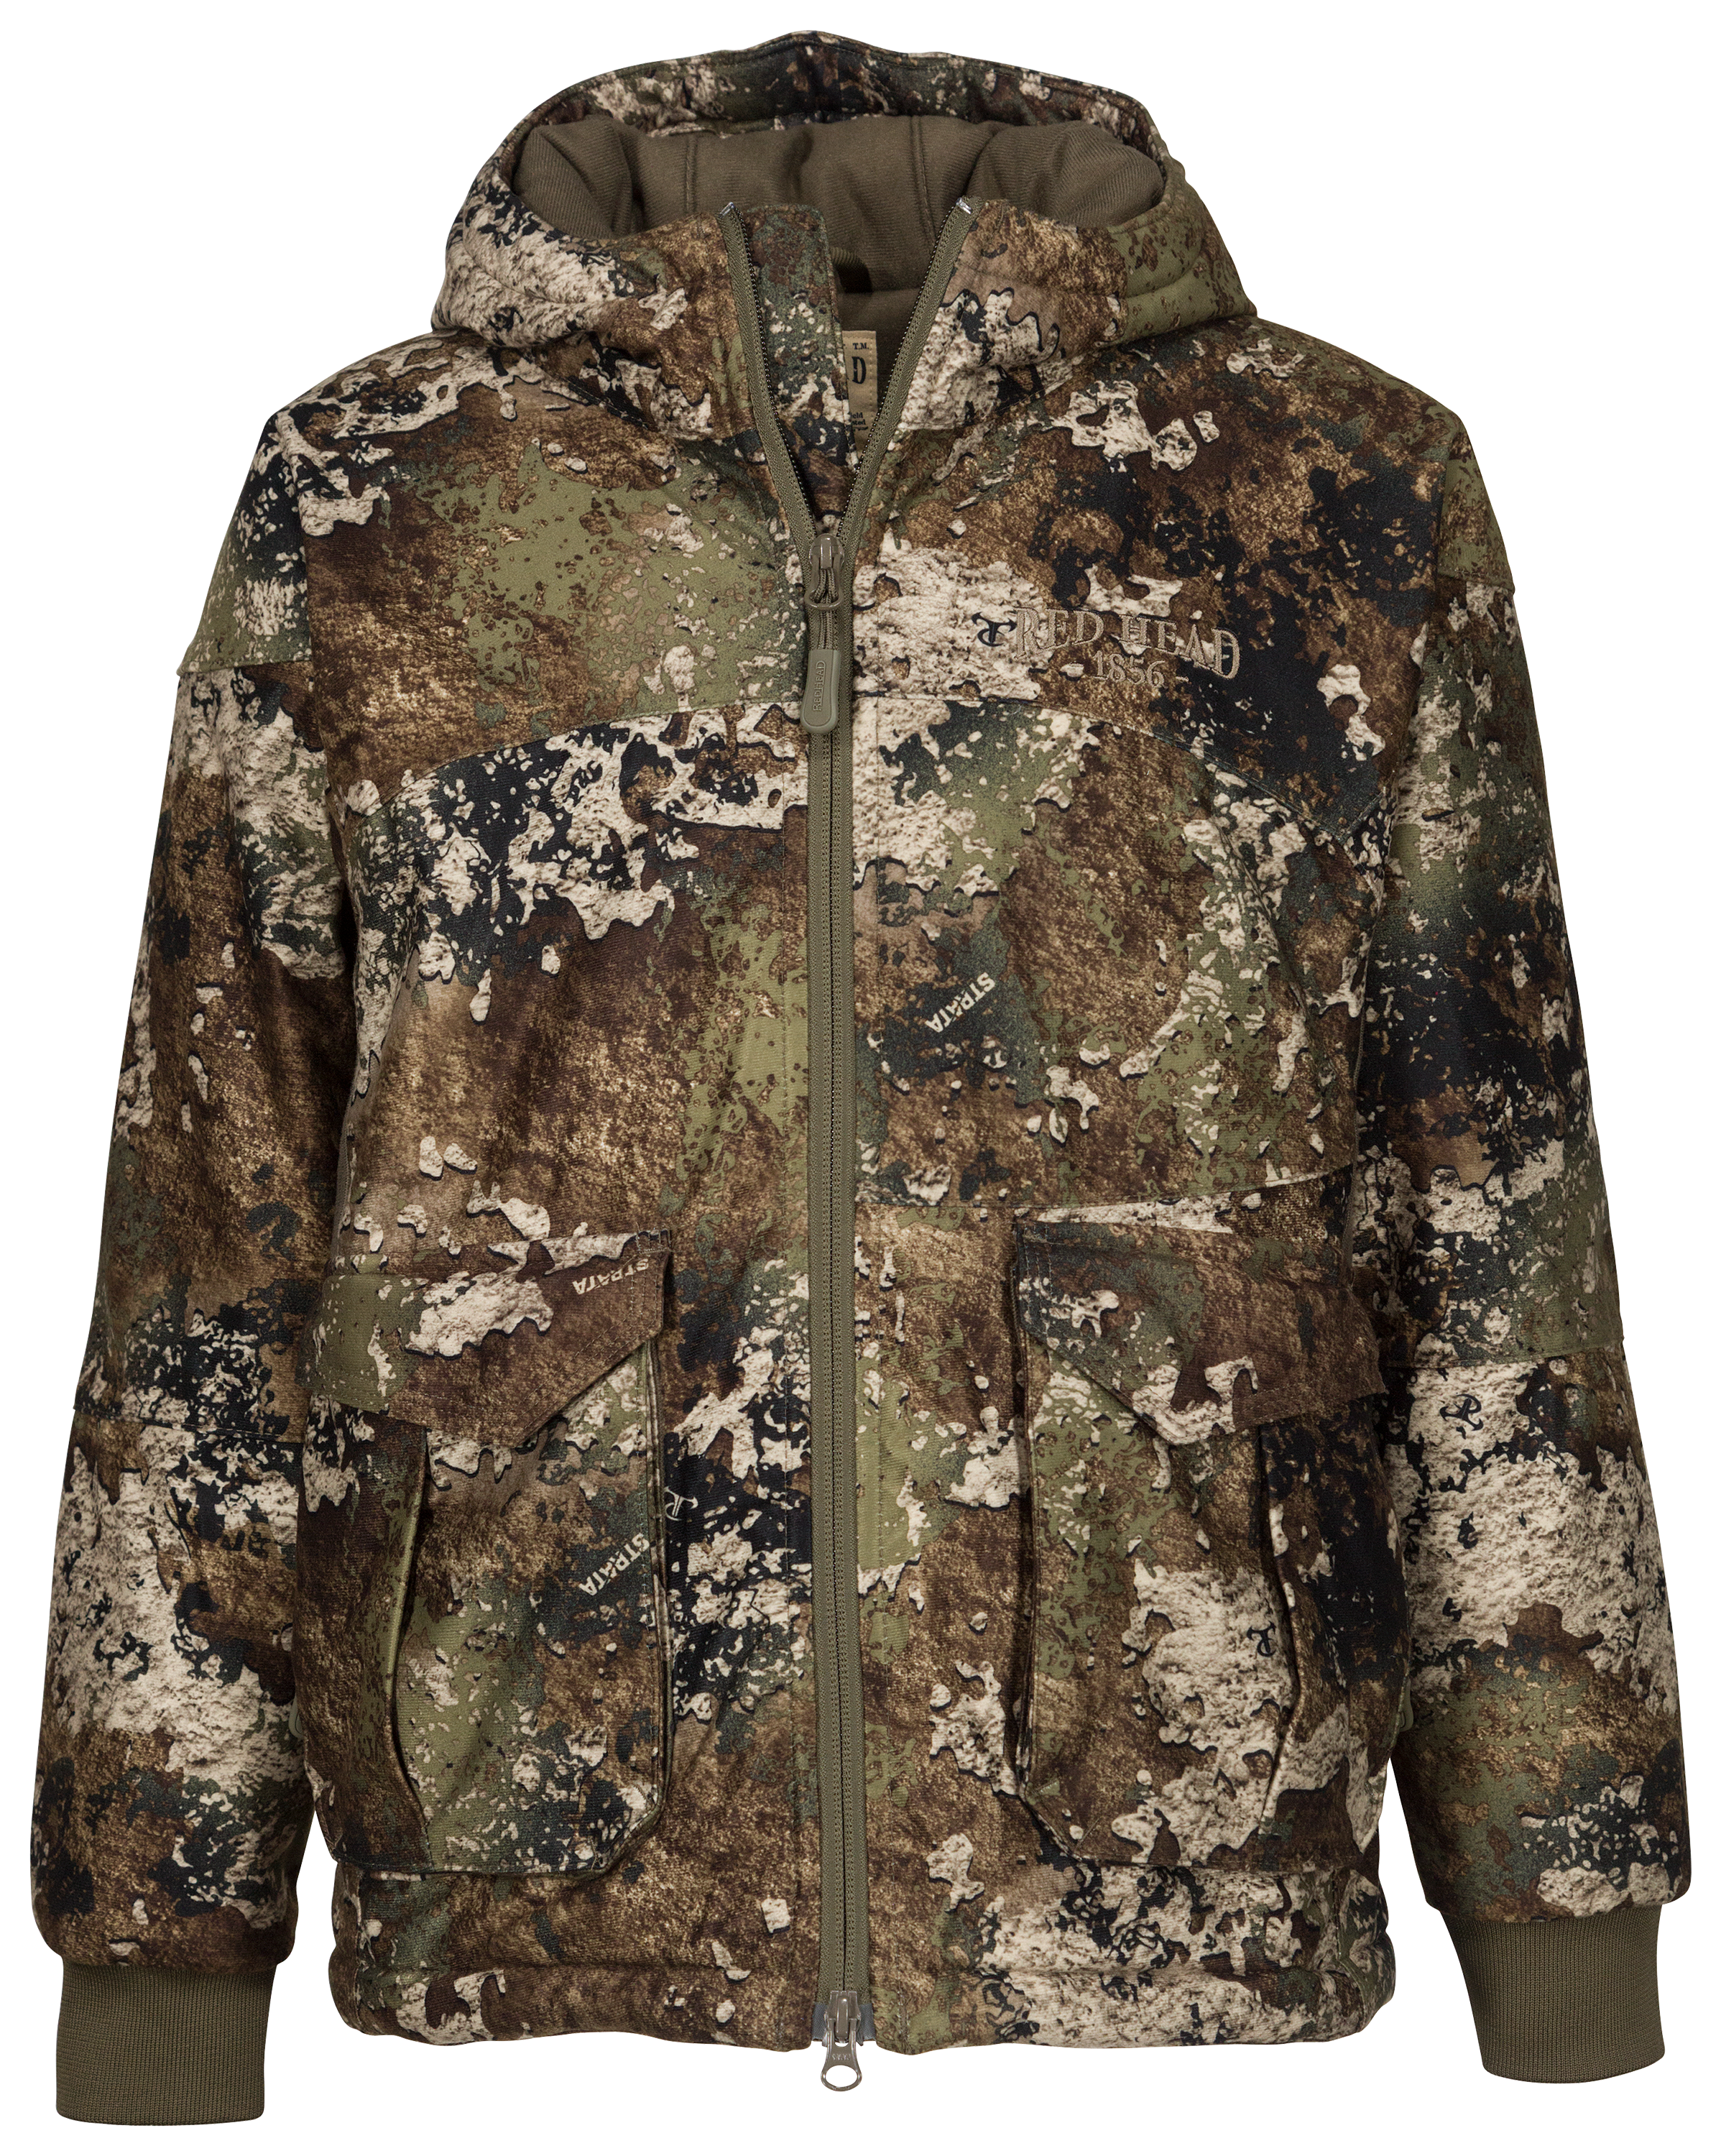 Drake Waterfowl Wingshooter Long-Sleeve Button-Down Shirt for Men